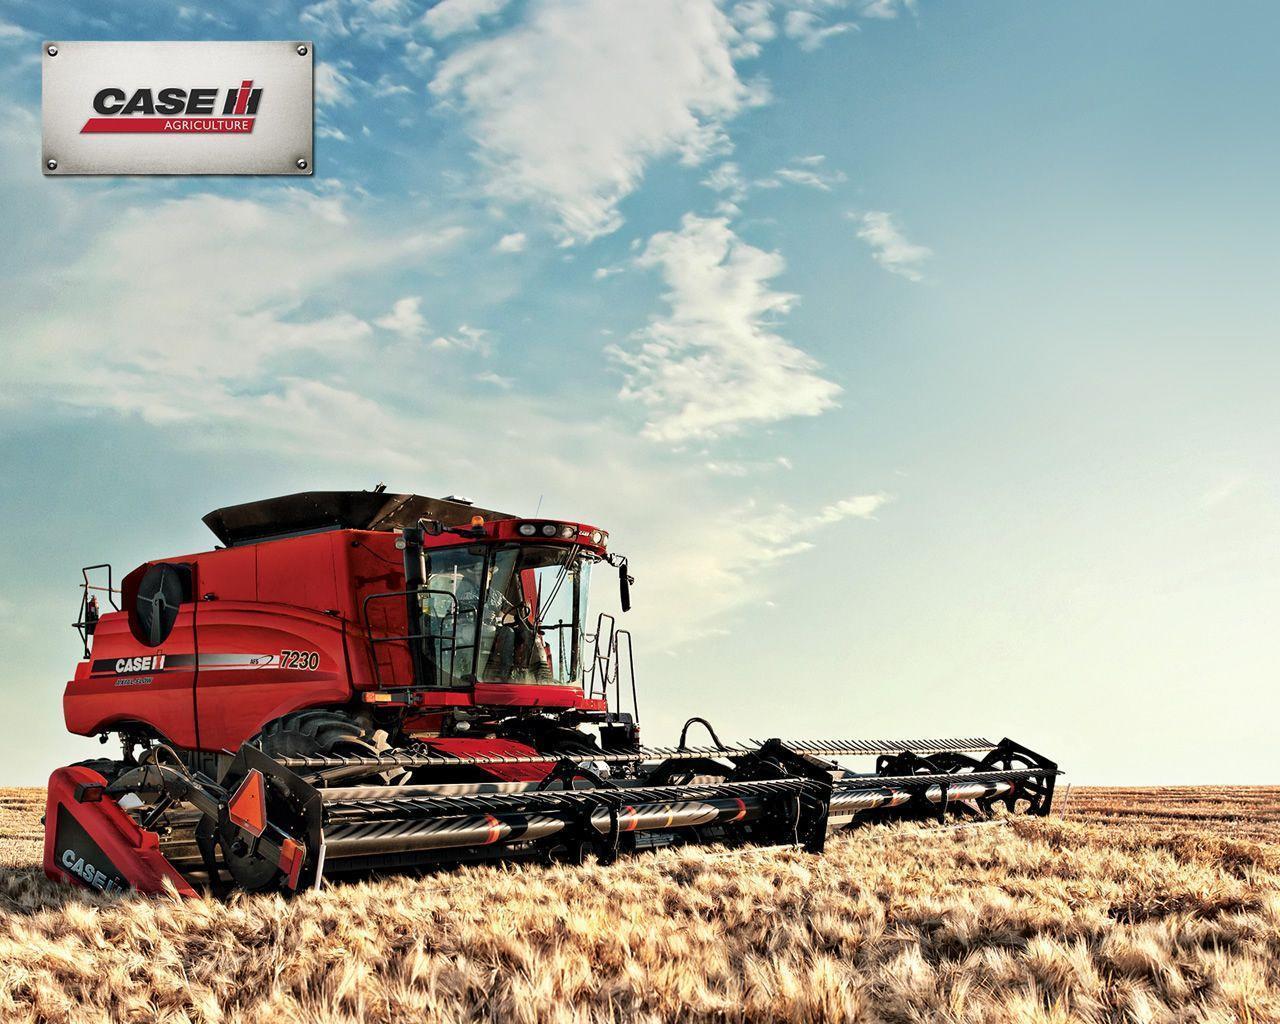 CASE IH  Here is a great Quadtrac wallpaper image you can add to your  computer  Facebook